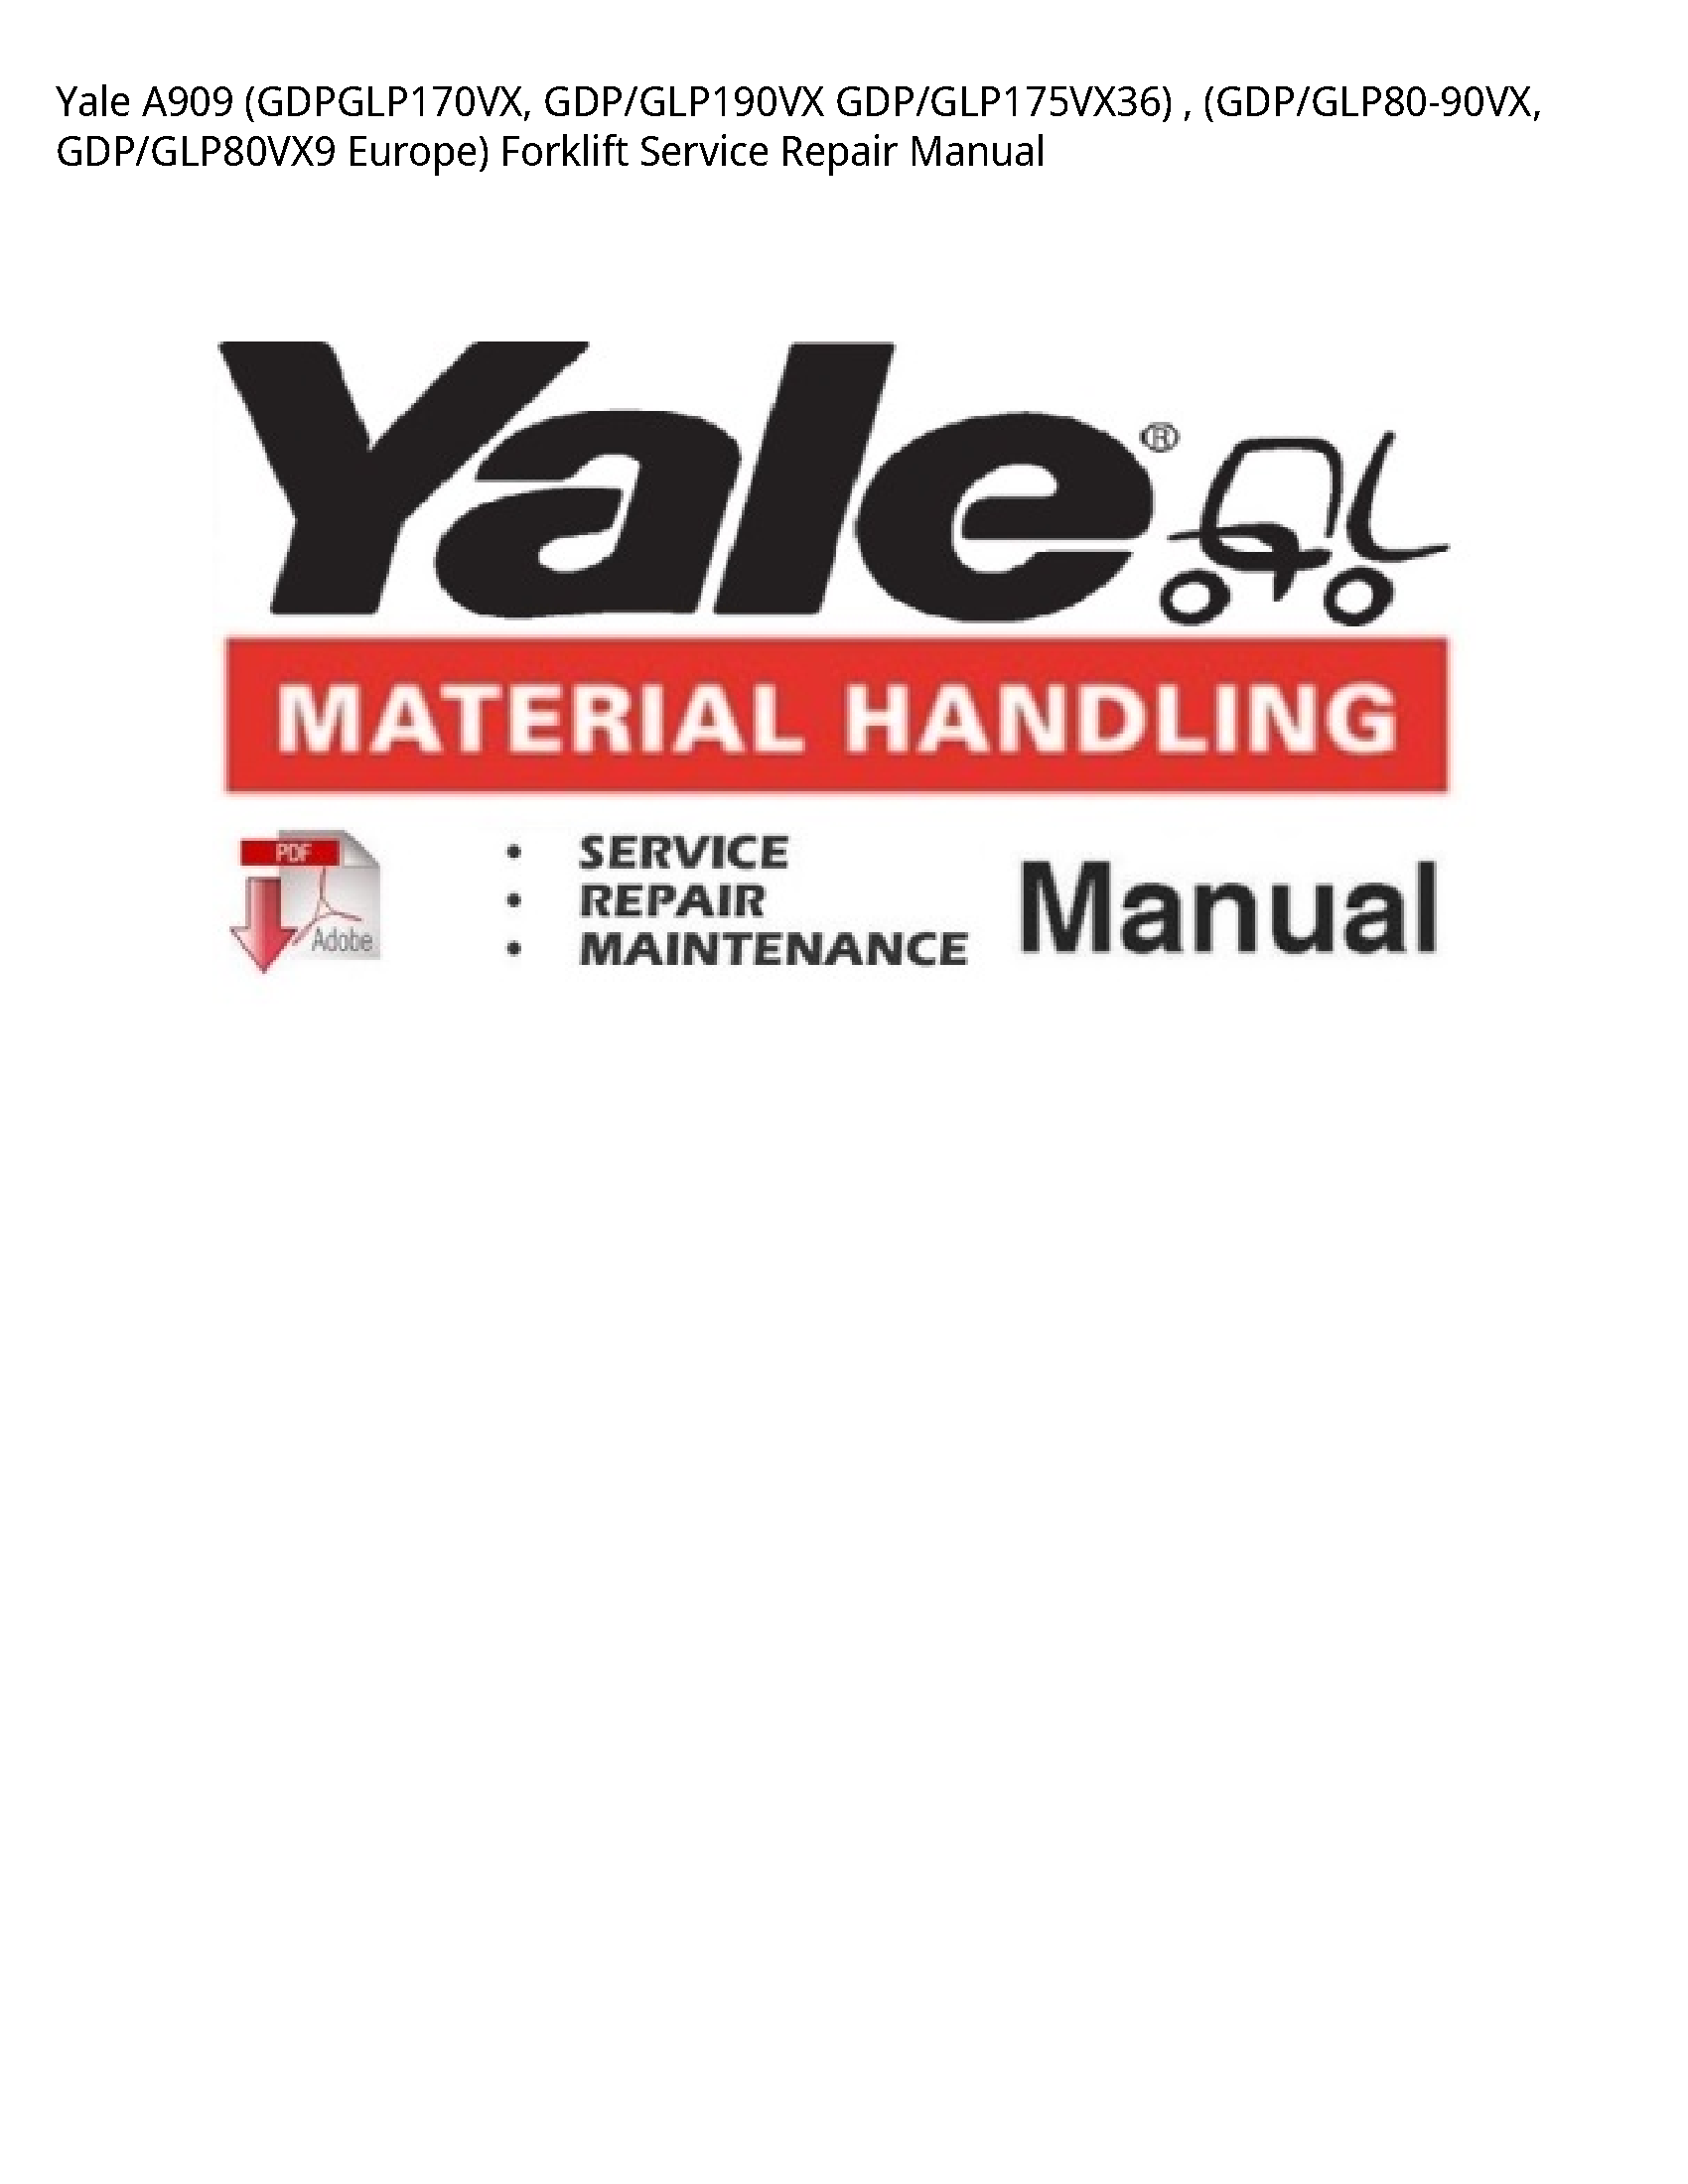 Yale A909 Europe) Forklift manual